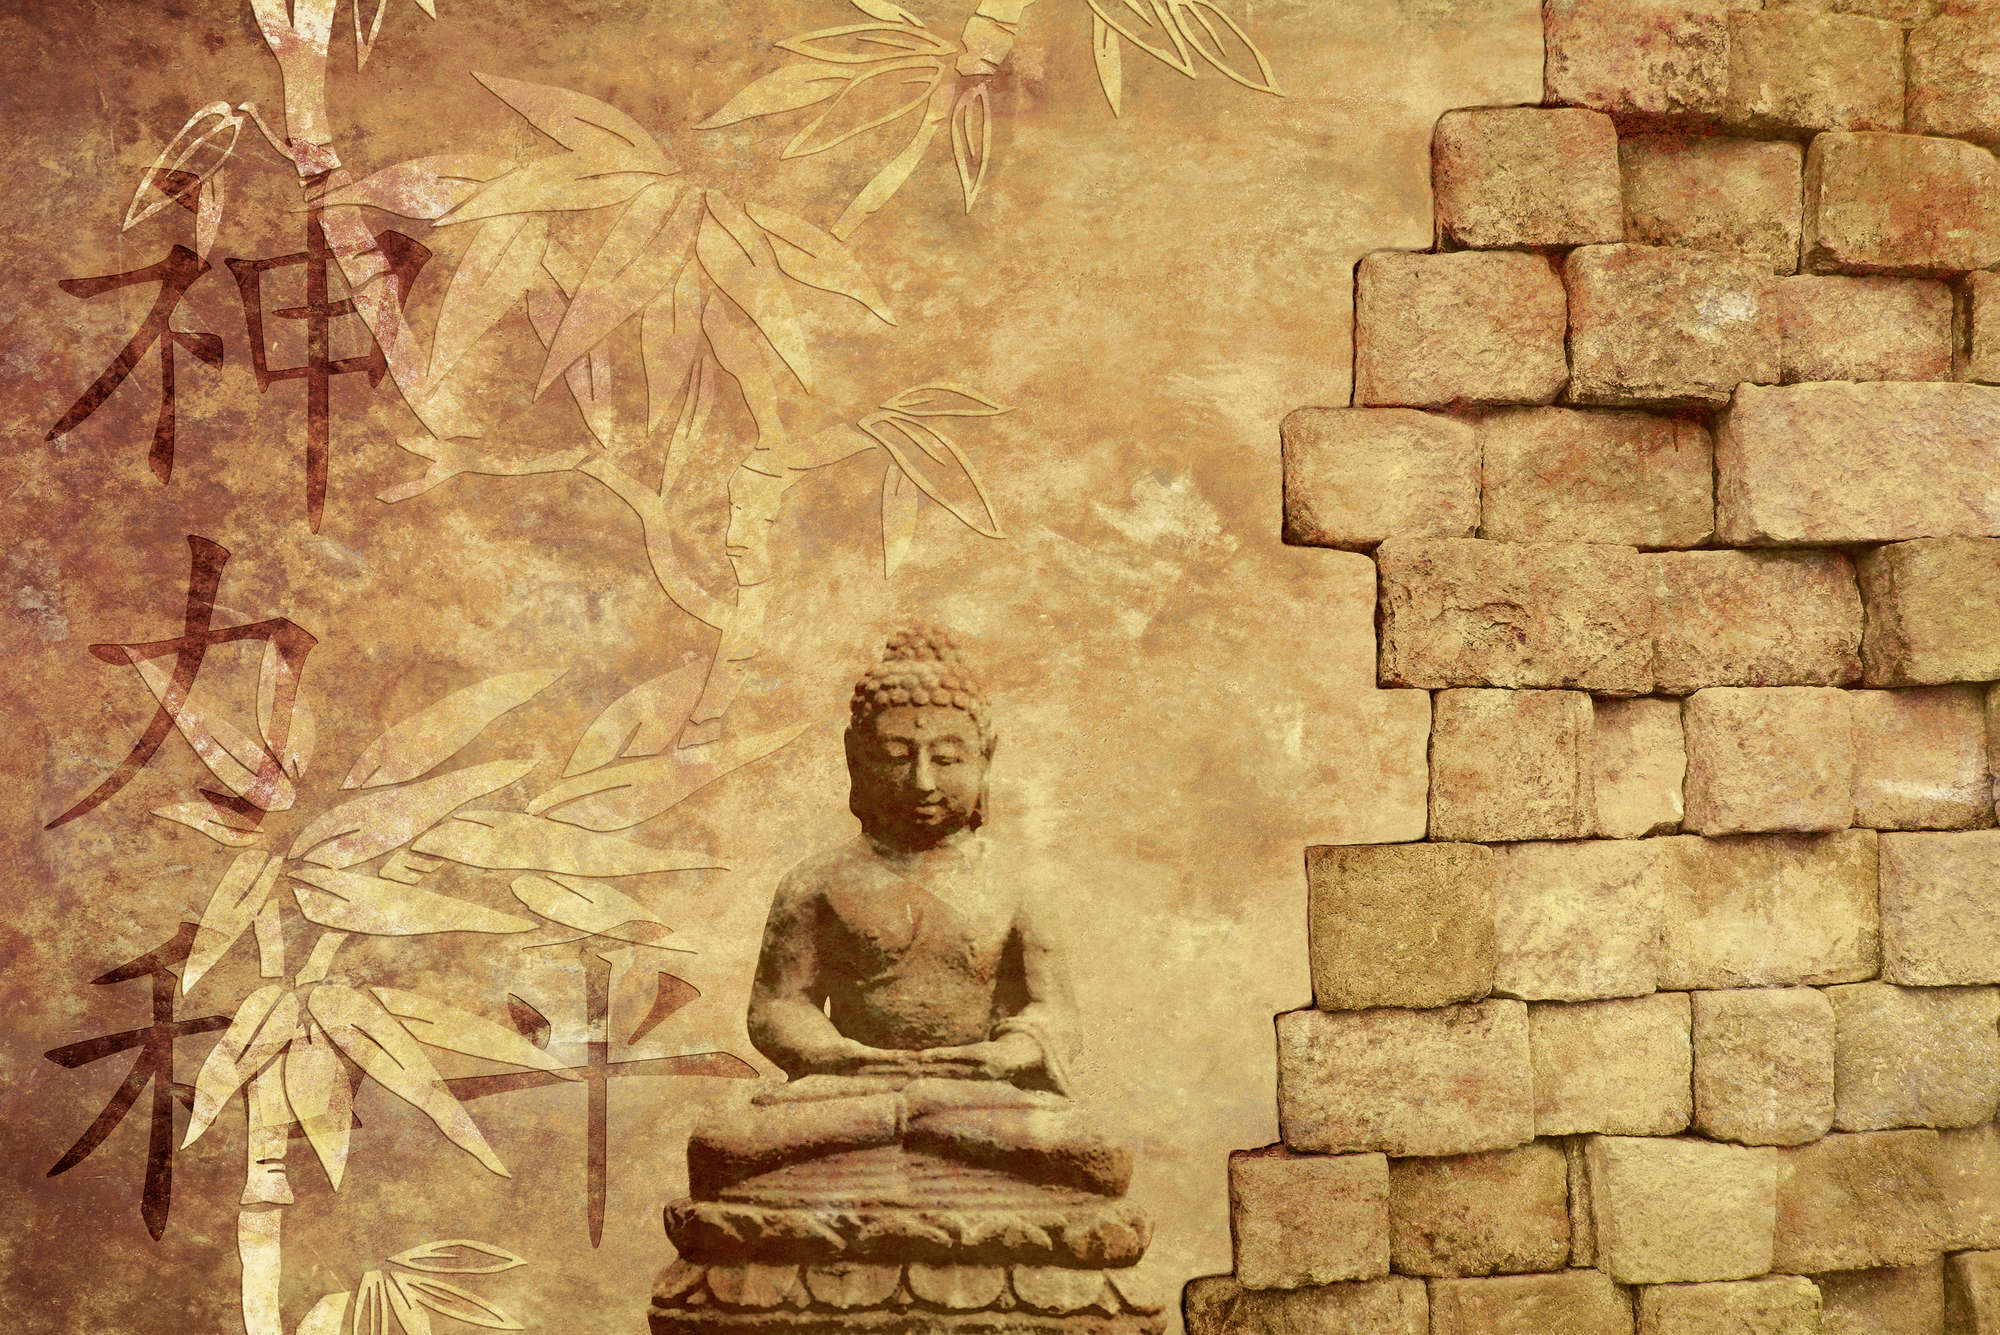             Photo wallpaper with Buddha figure - Textured non-woven
        